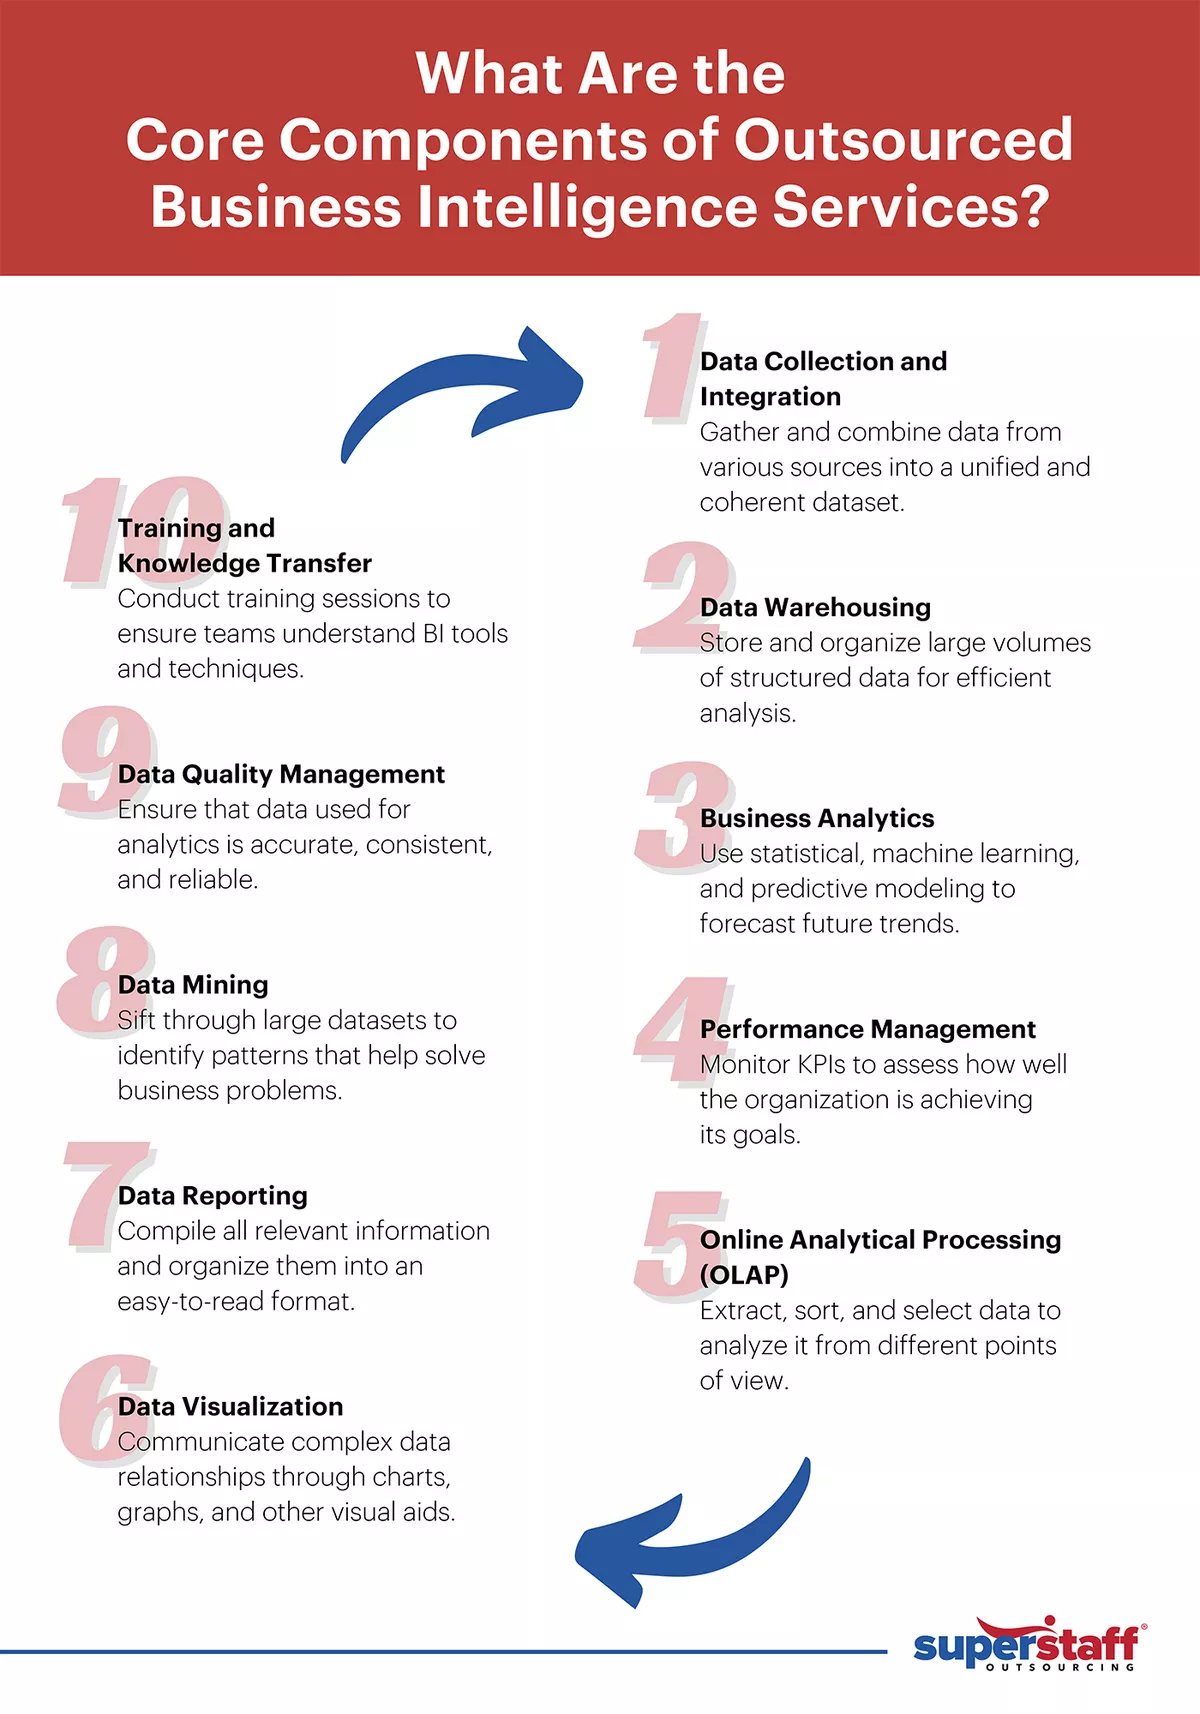 An infographic showing the core components of outsourced business intelligence services.